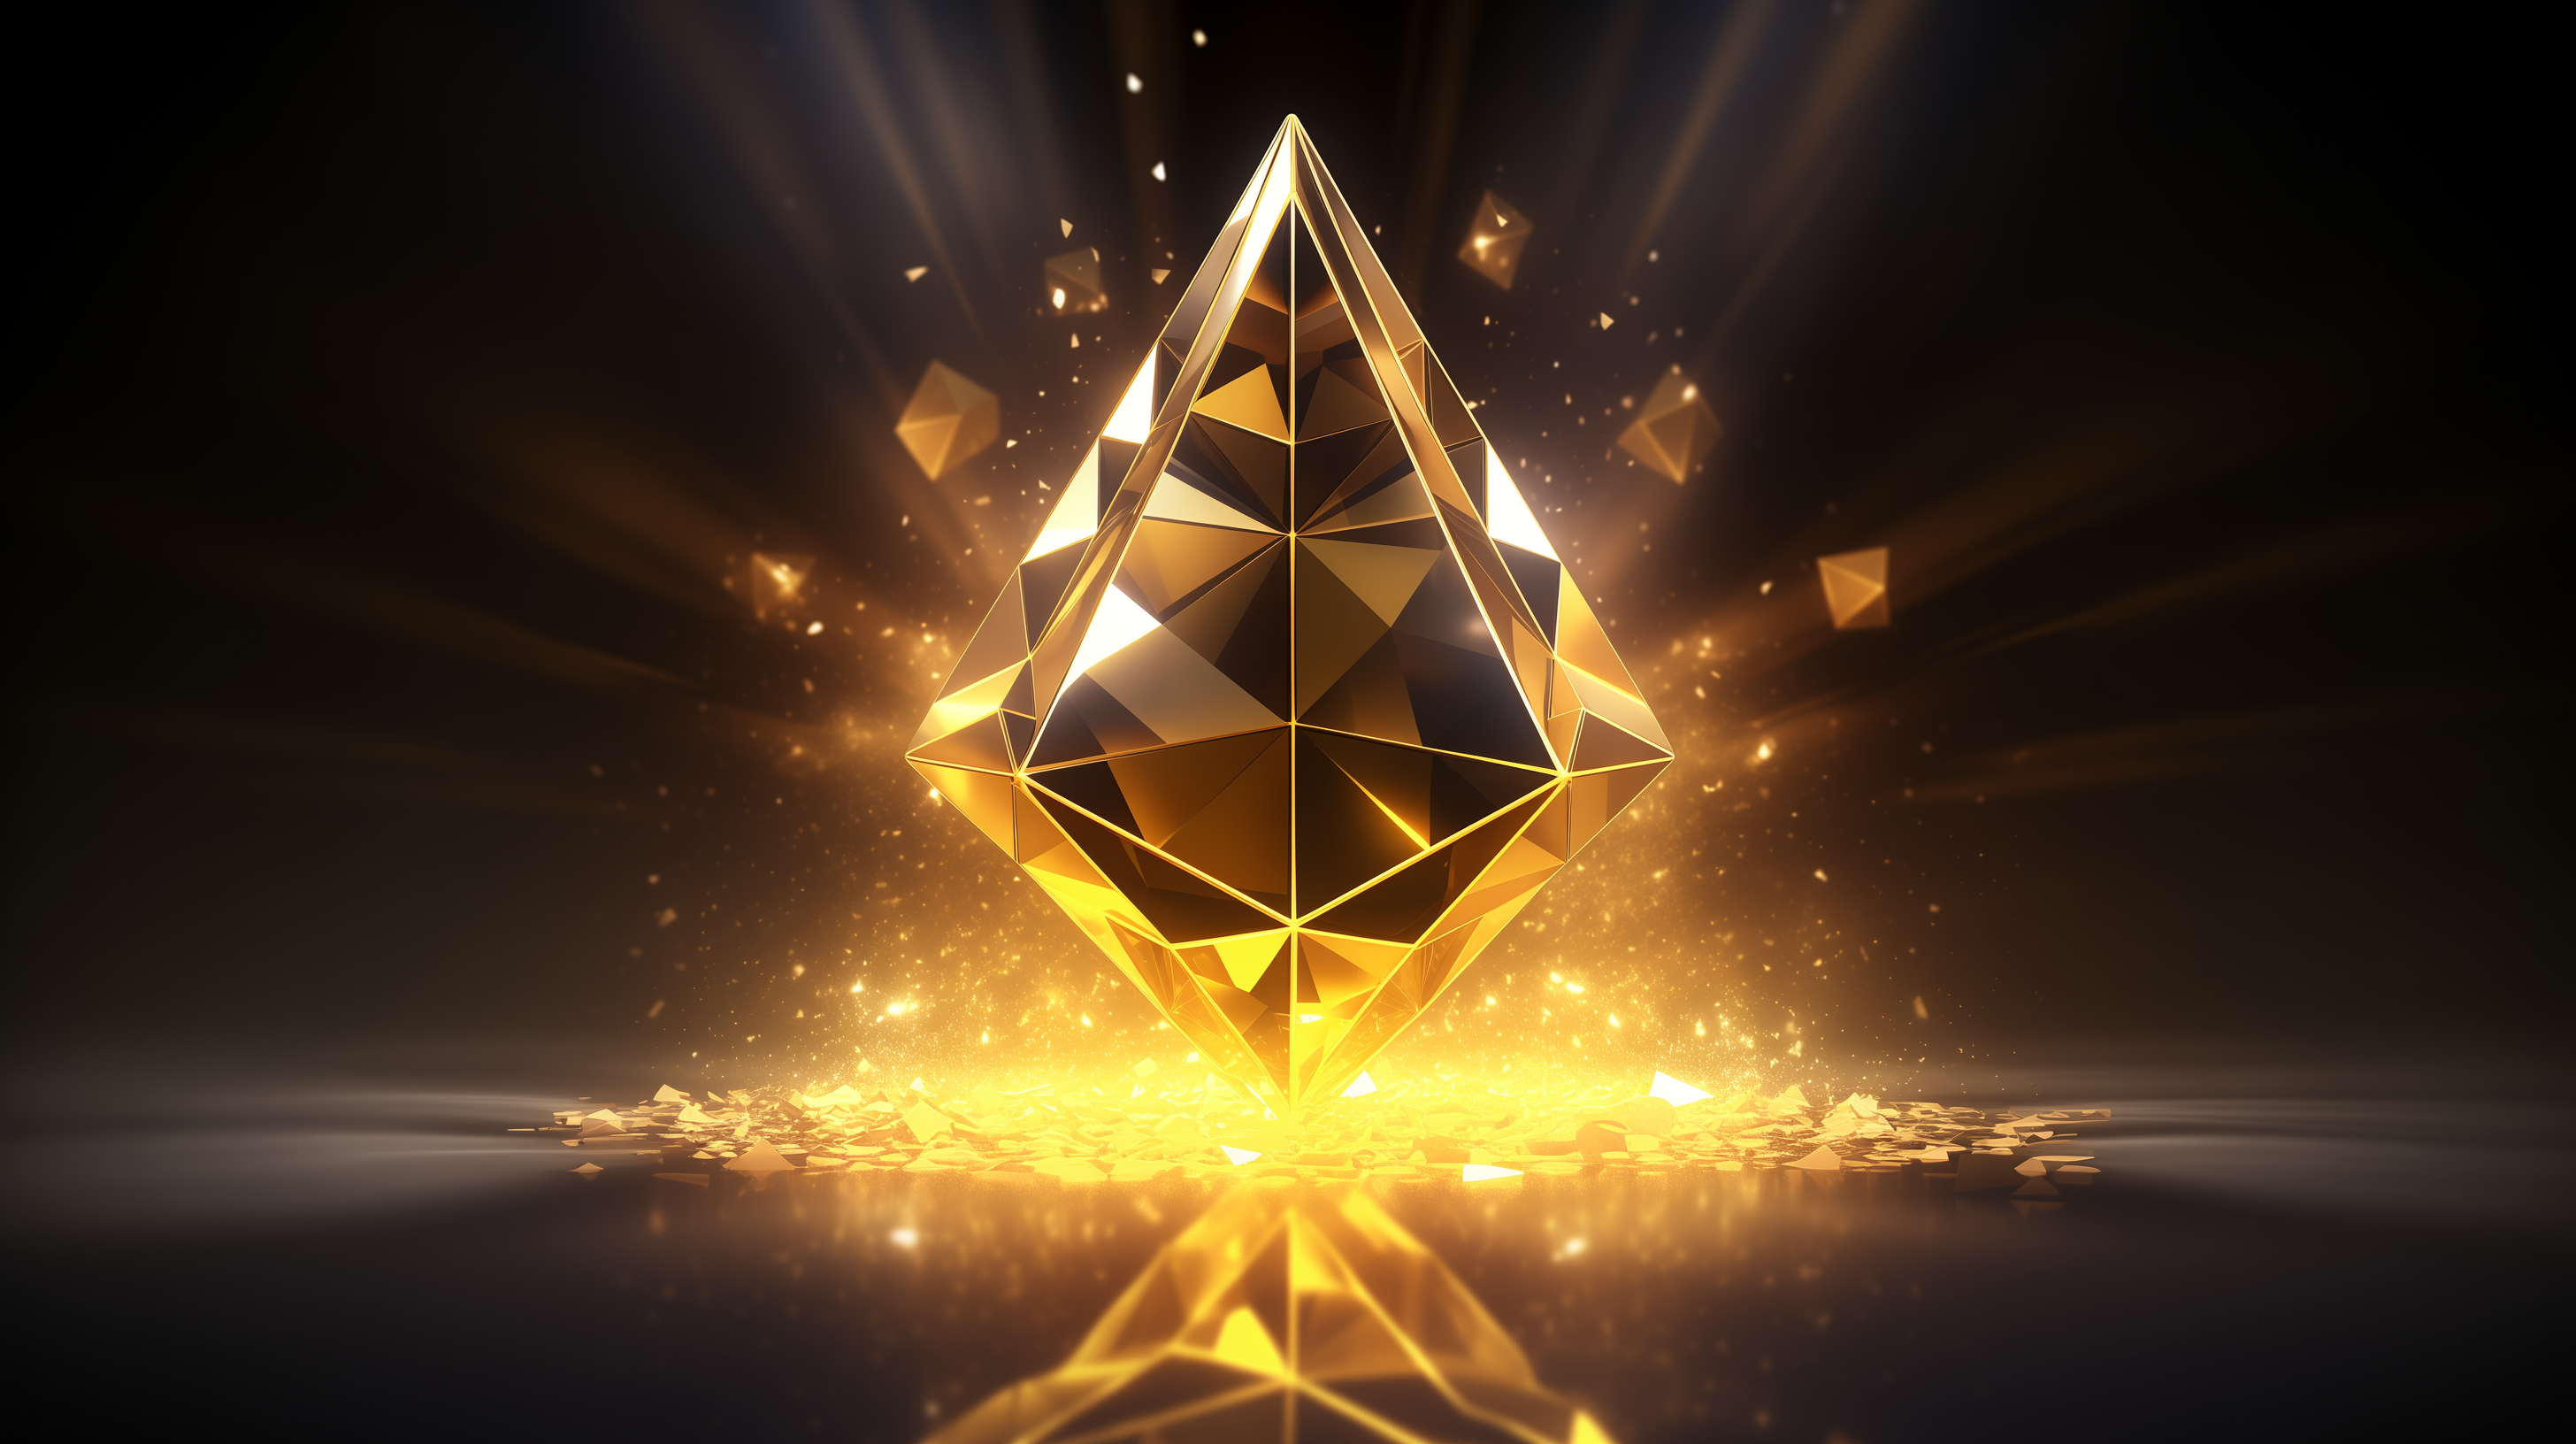 Ethereum logo shining brightly as a golden 3D crystal against a dark background with sparkling effects, ideal for HD cryptocurrency-themed desktop wallpaper.